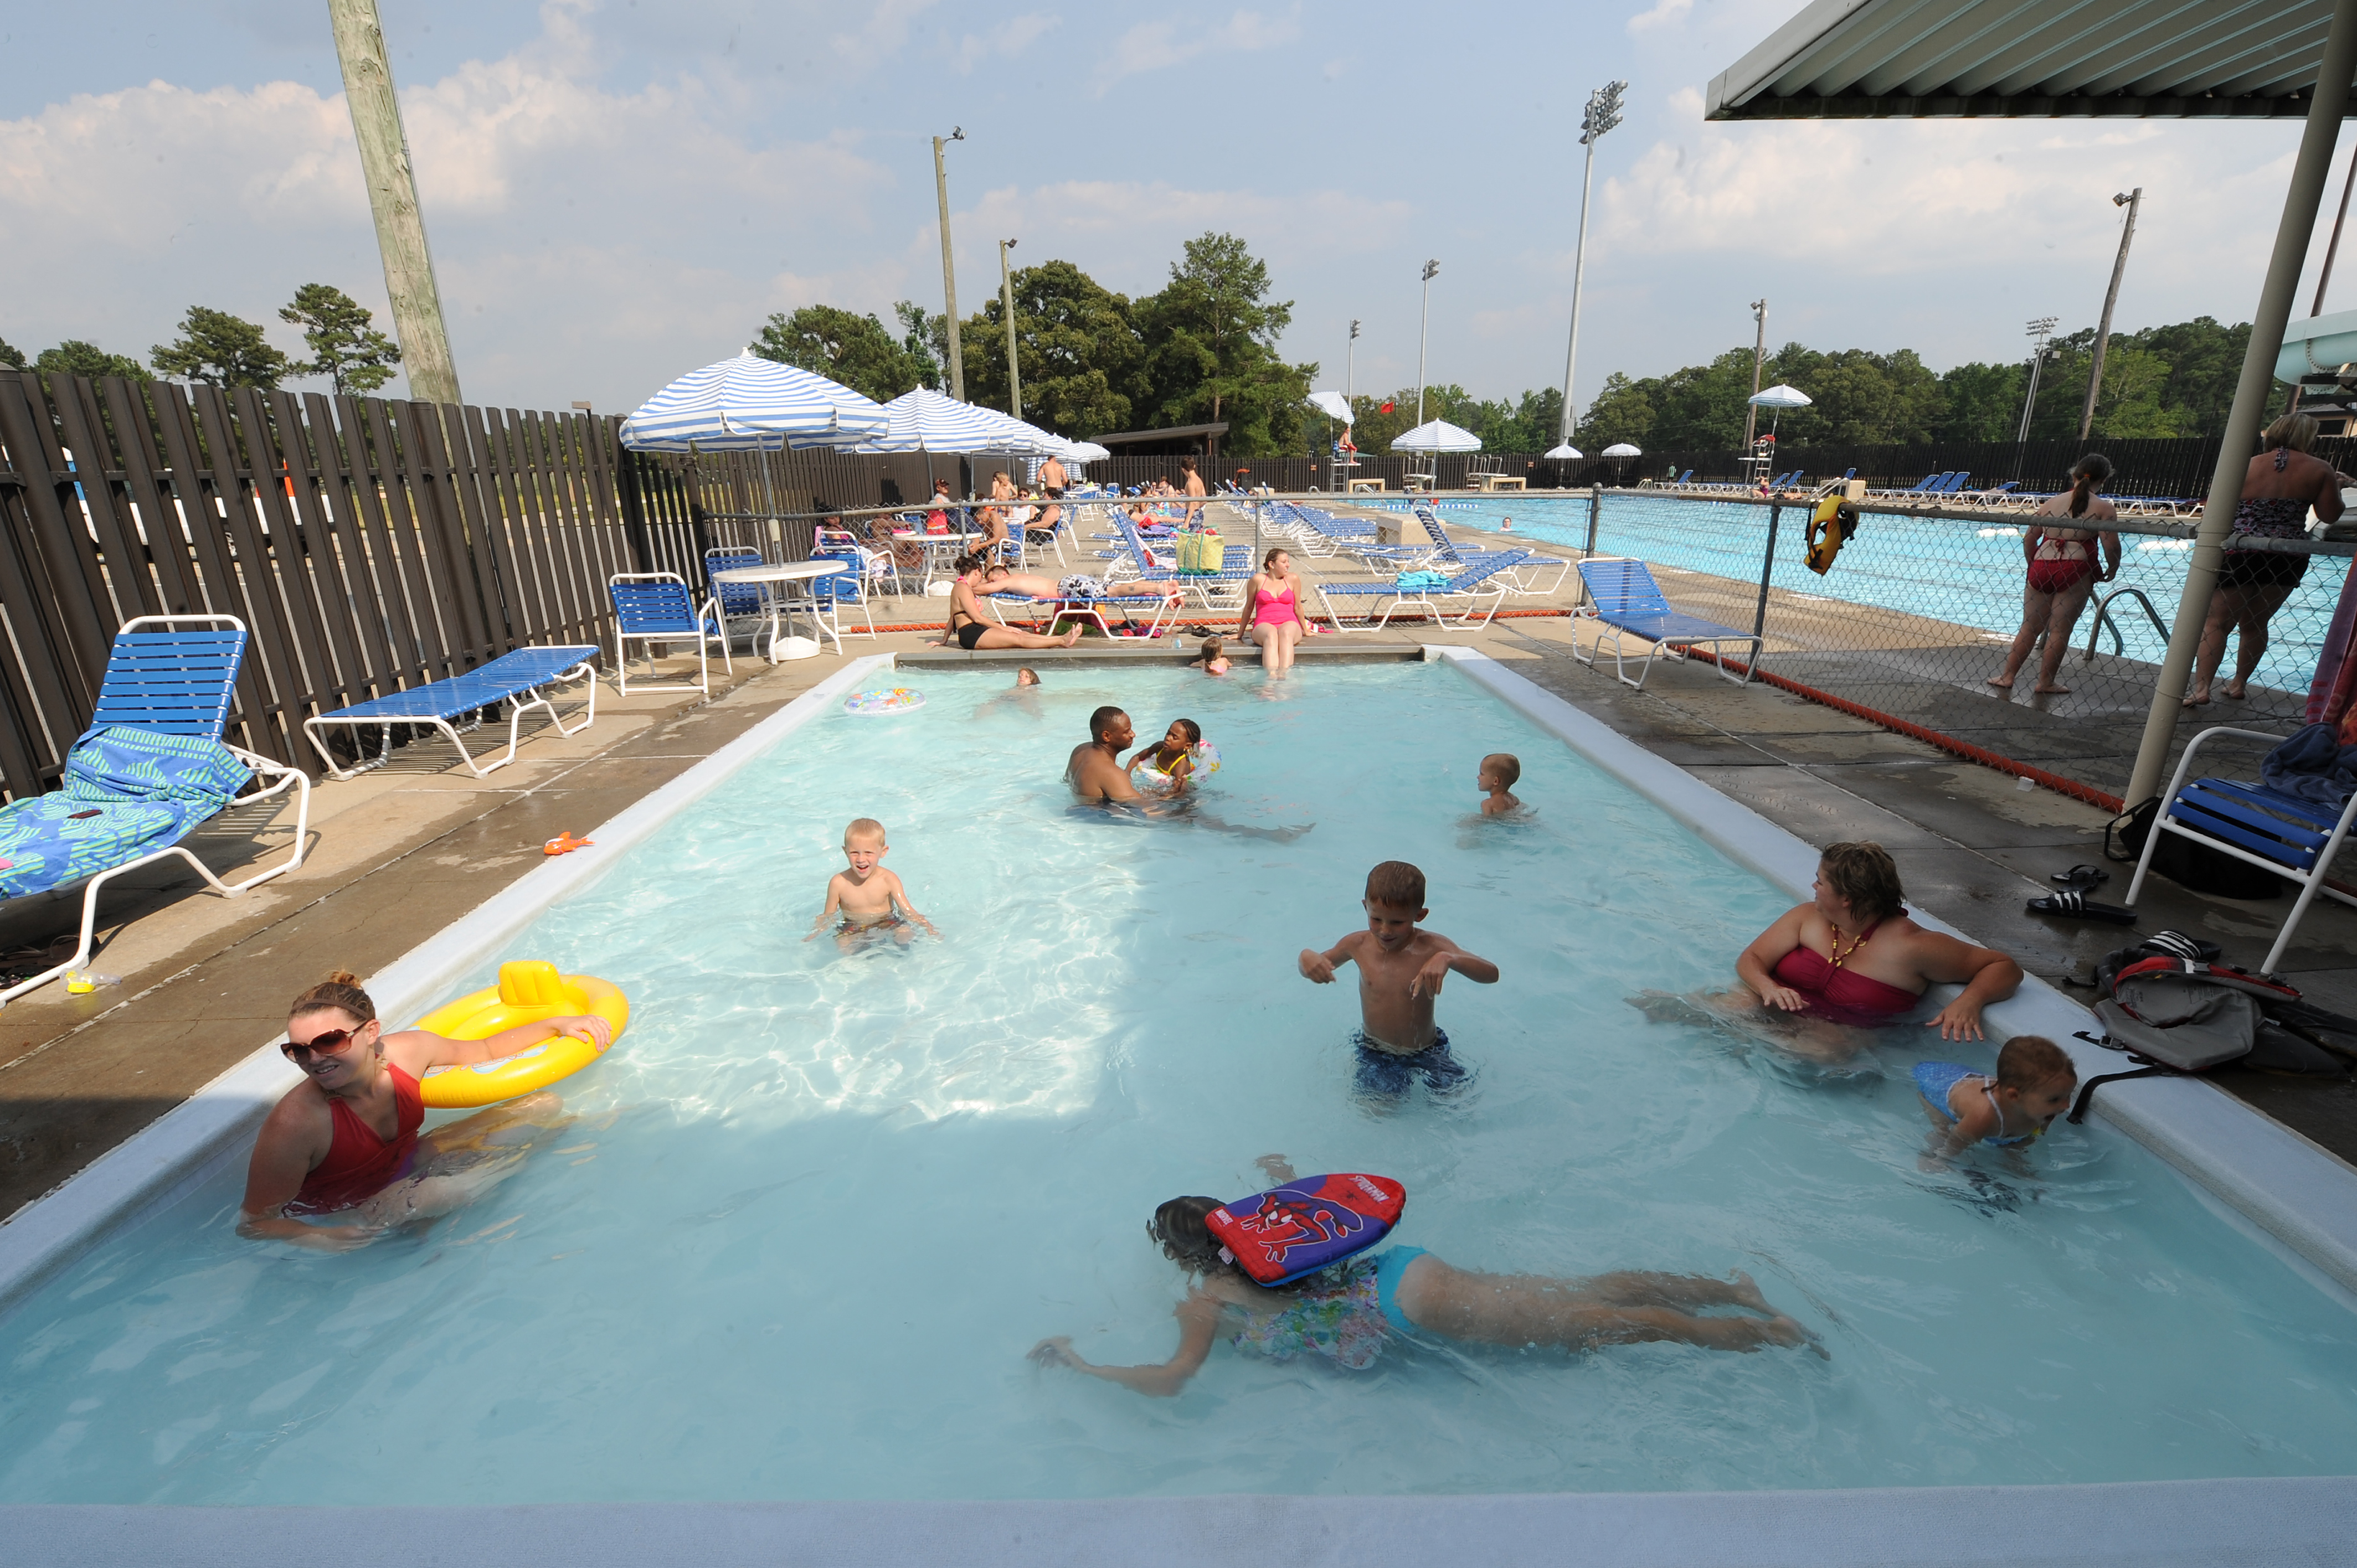 Swimming in the summer time > Seymour Johnson Air Force Base ... - DOWNLOAD HI-RES / PHOTO DETAILS